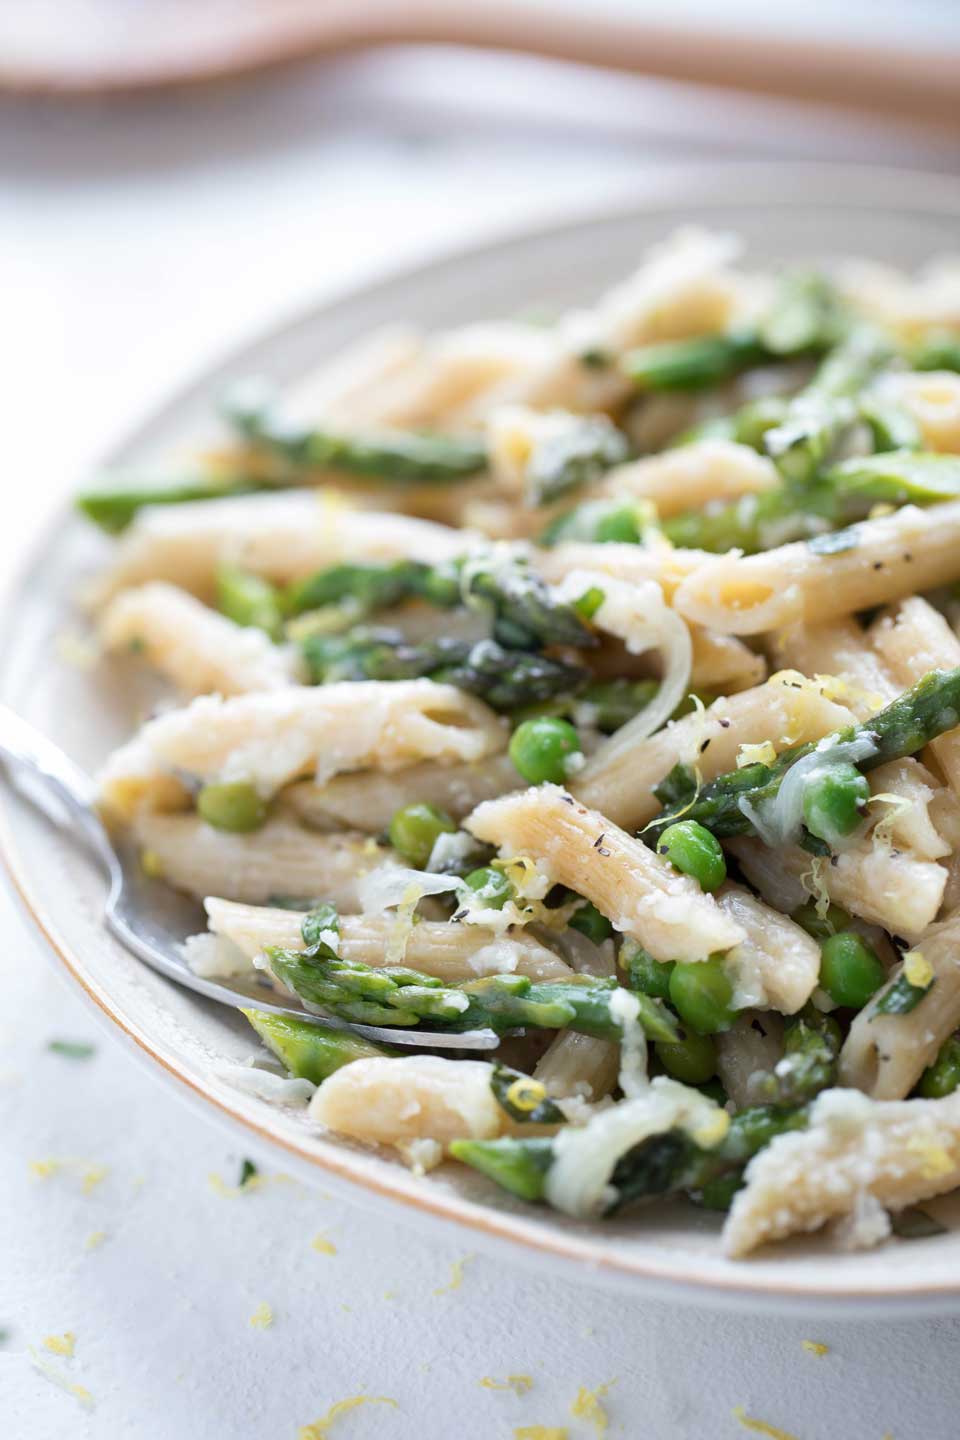 In this vegetarian one-pot recipe, whole-wheat pasta is cooked all together with crisp-tender asparagus and sweet peas, then accented with savory parmesan, bright lemon, and fresh tarragon. It’s all draped in a light sauce that’s the perfect finishing touch!